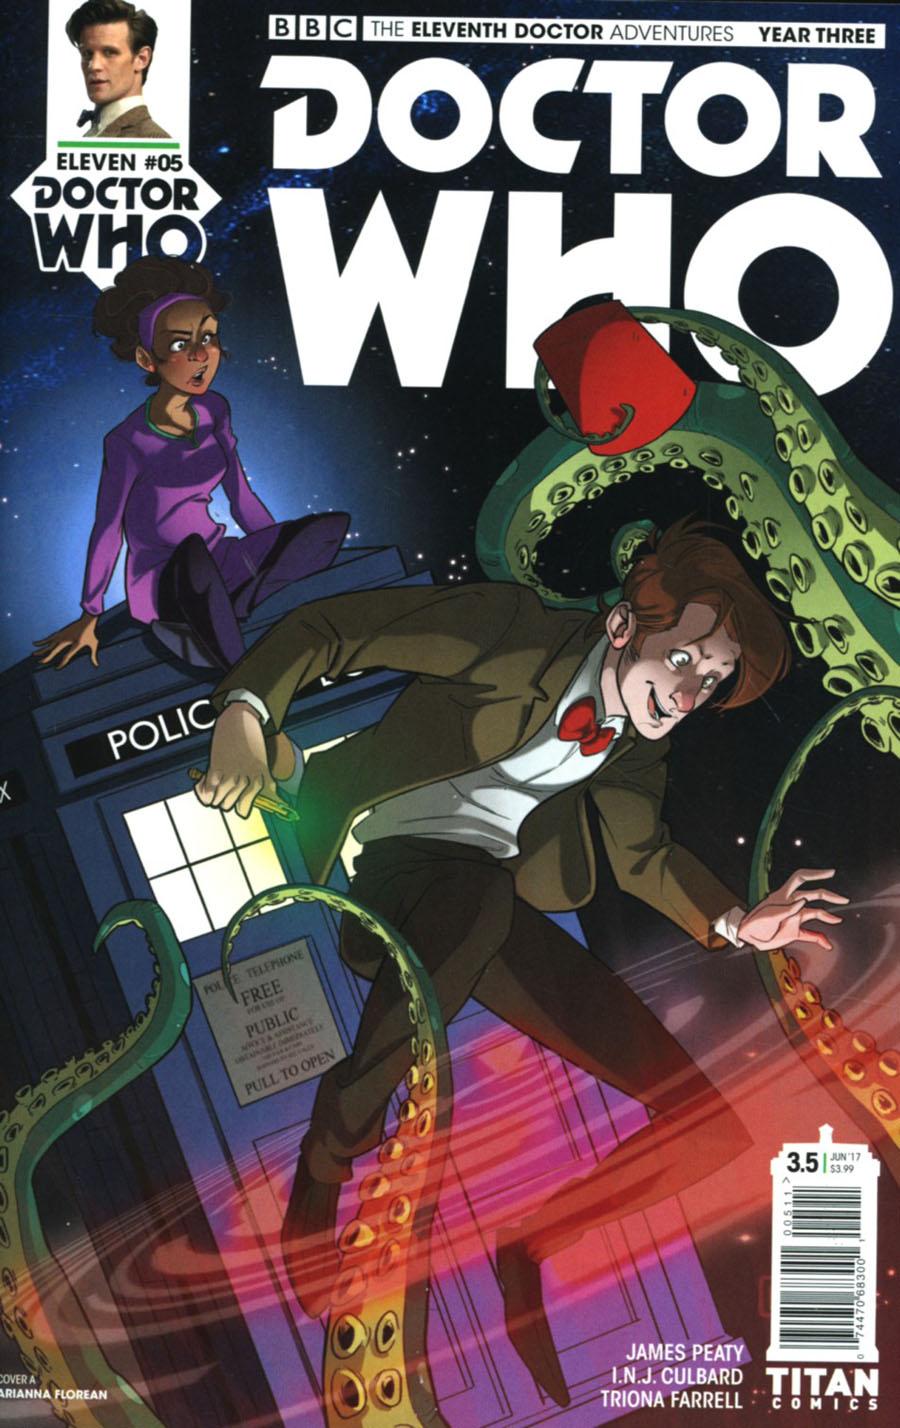 Doctor Who 11th Doctor Year Three Vol. 1 #5